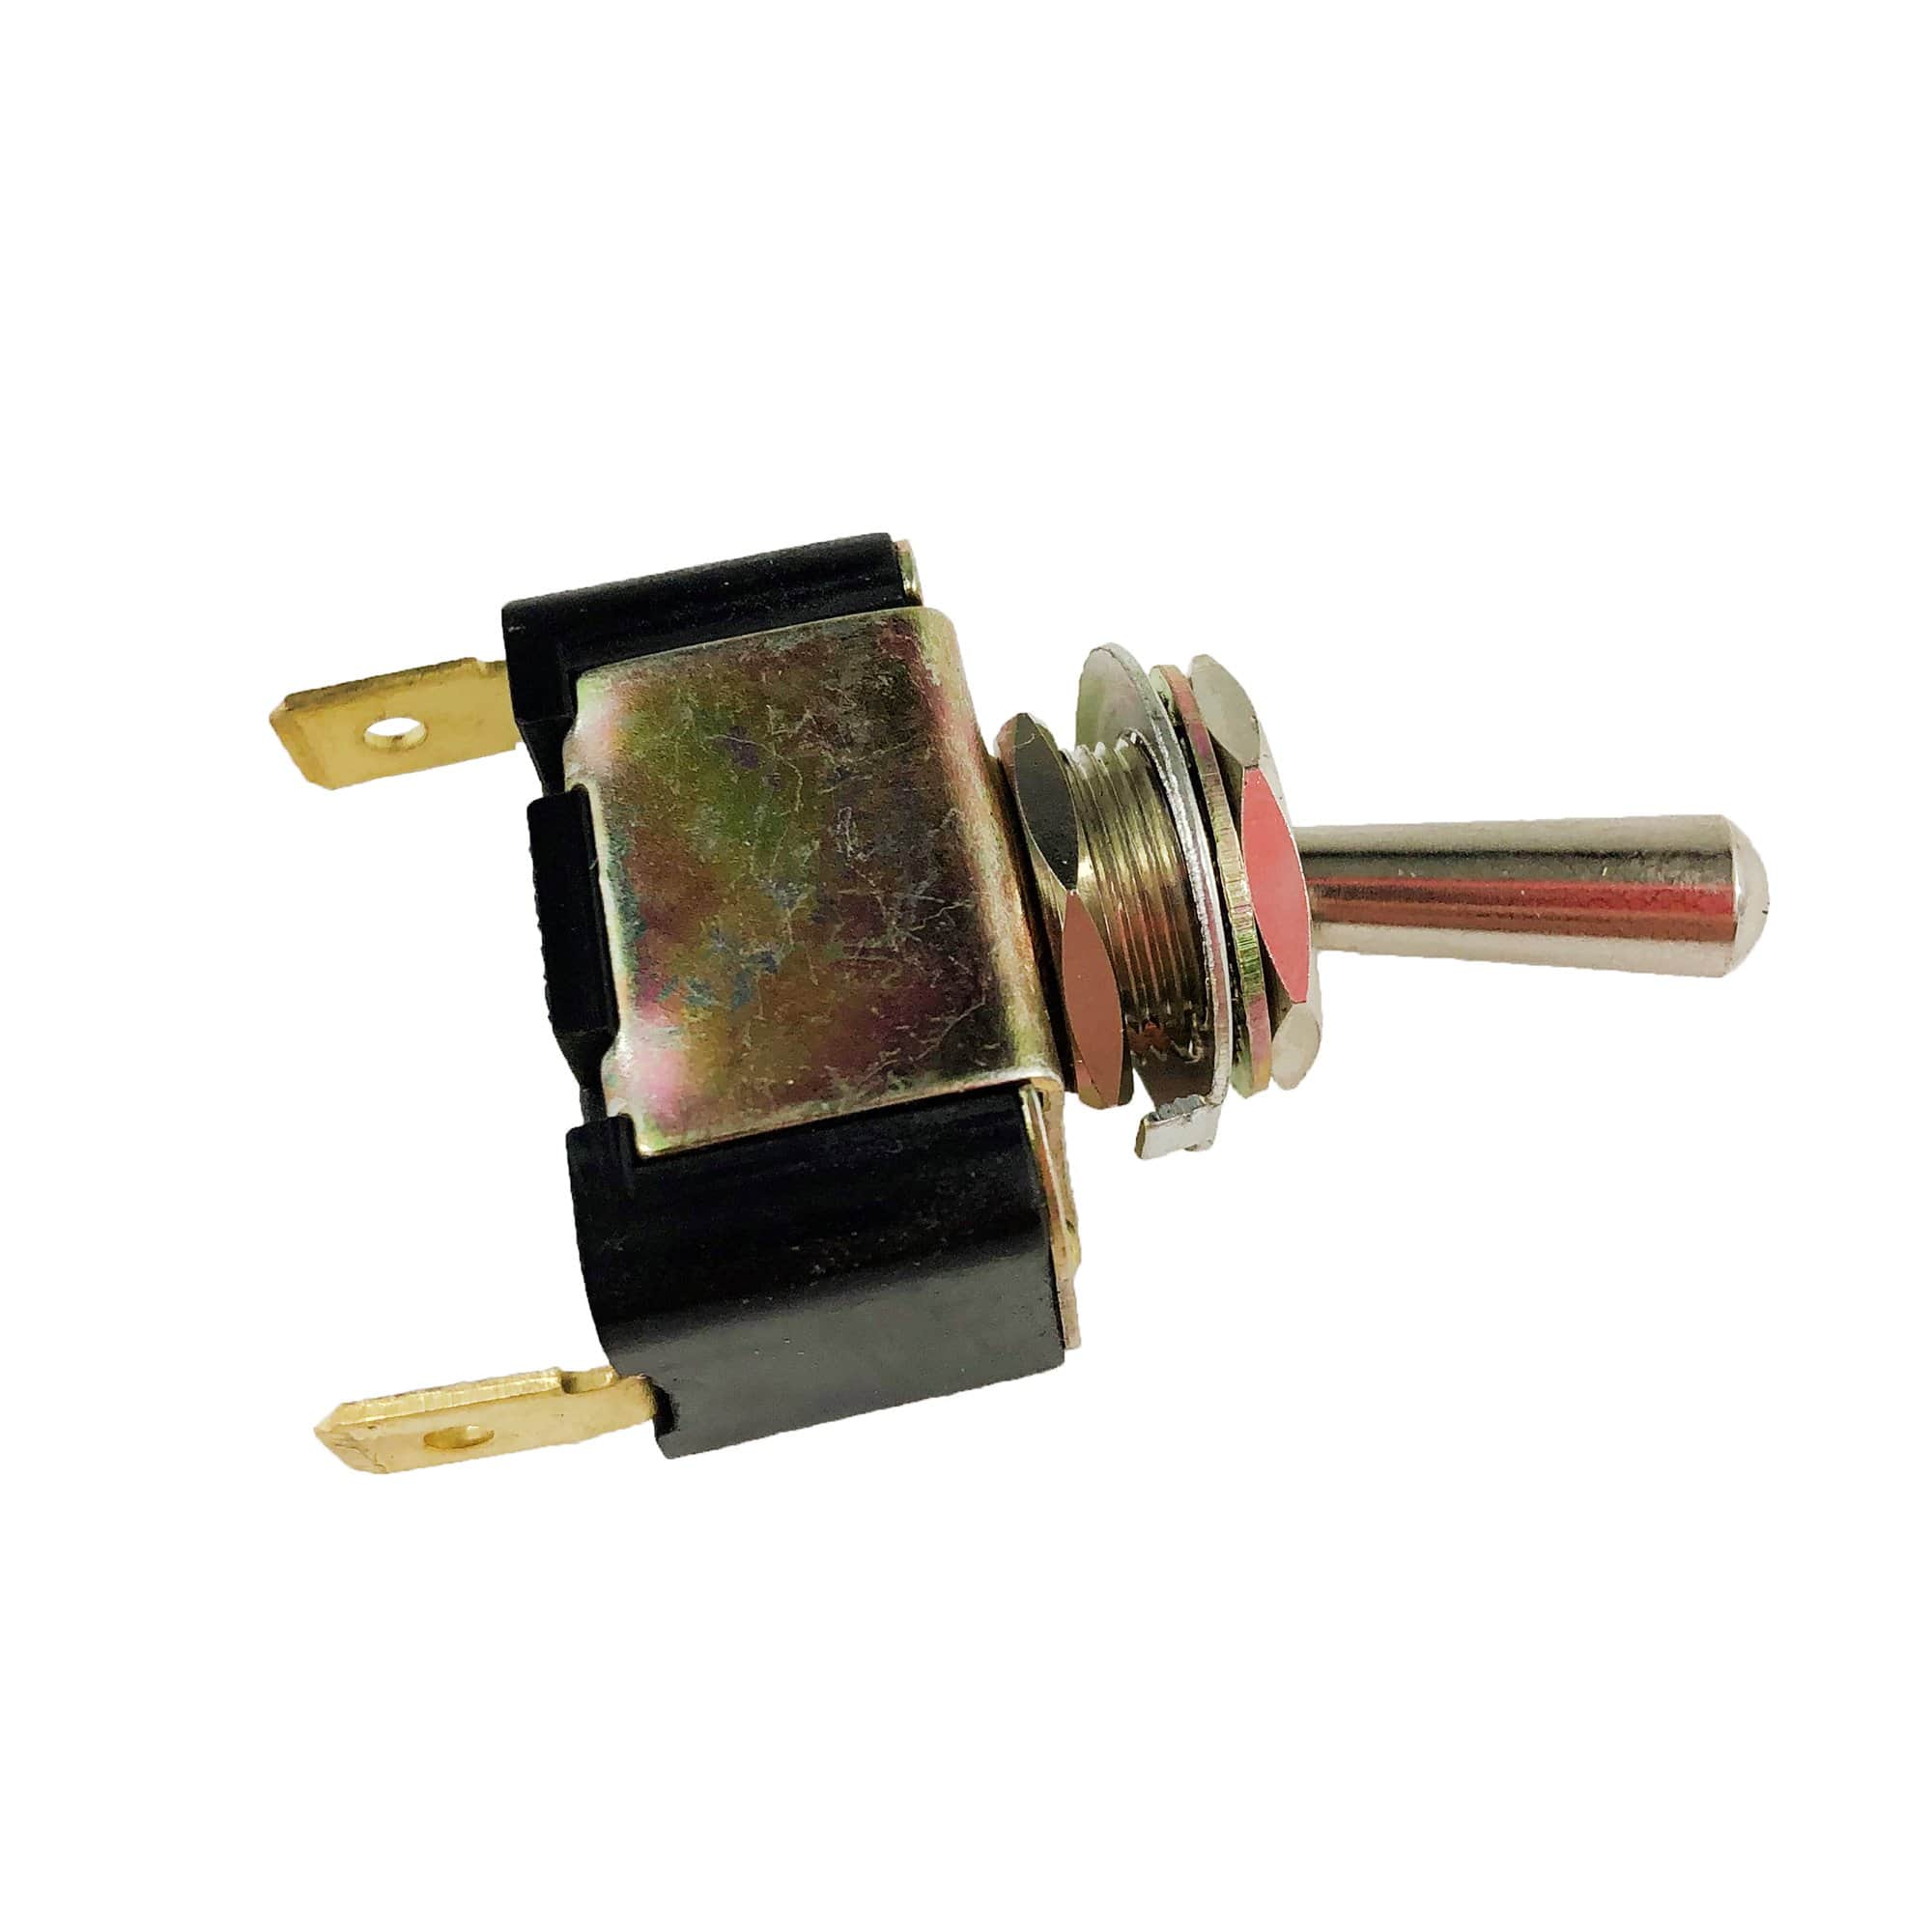 Attwood 14253-3 - 2 Position On/Off Metal Toggle Switch